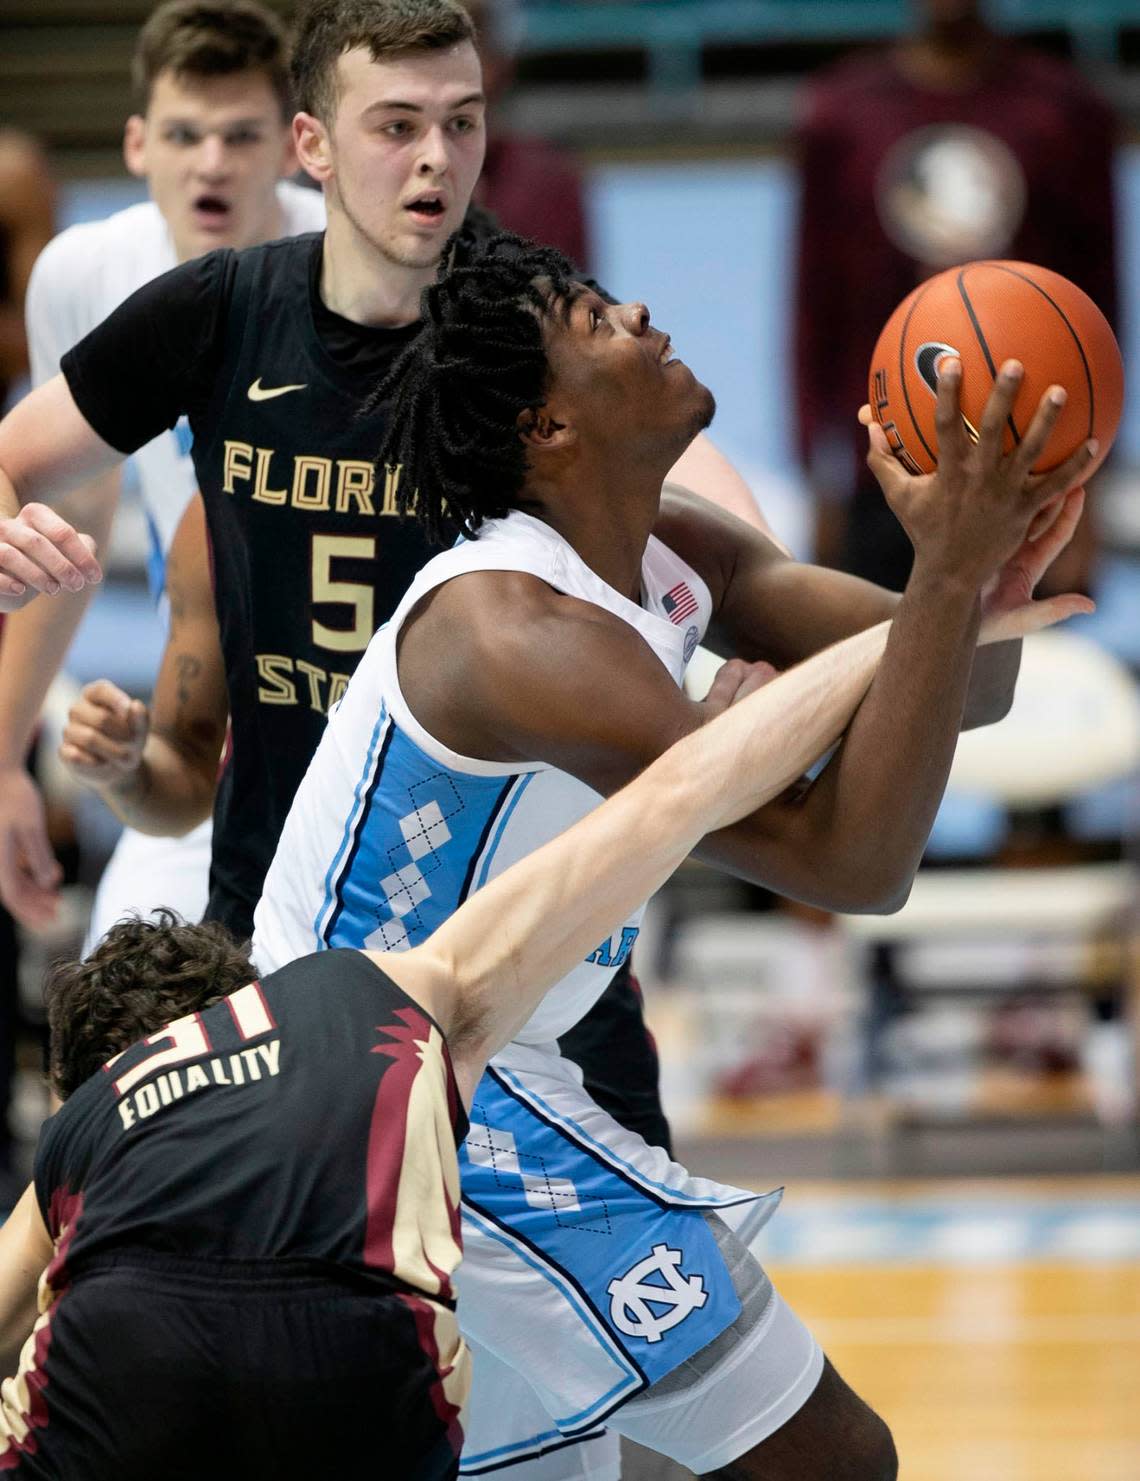 Florida State’s Wyatt Wilkes (31) fouls North Carolina’s Day’Ron Sharpe (11) during the first half on Saturday, February 27, 2021 in Chapel Hill, N.C.